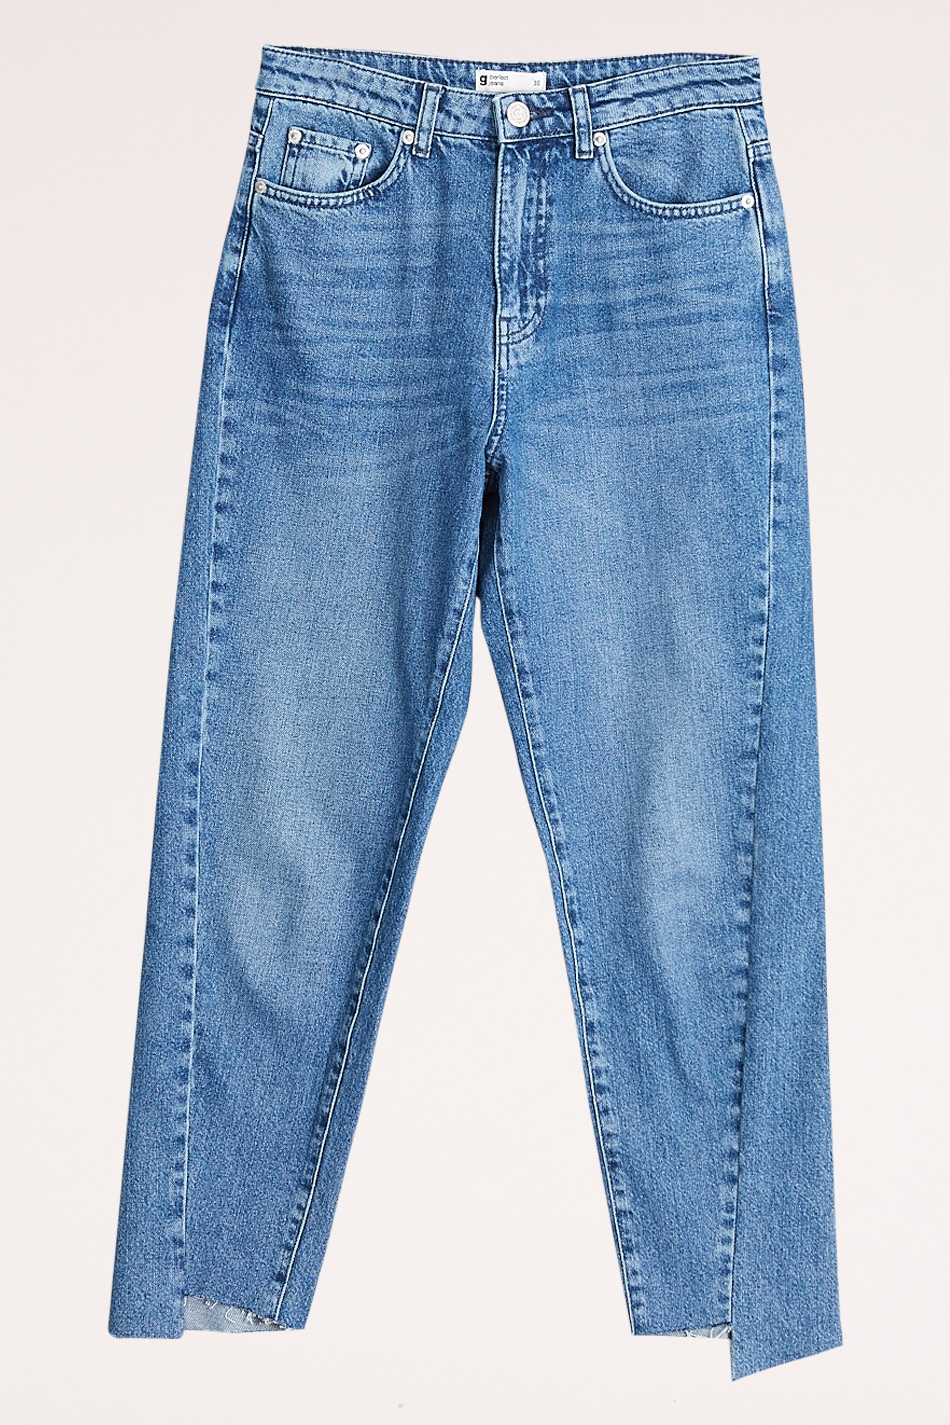 mom jeans rea 2018 sommar gina tricot